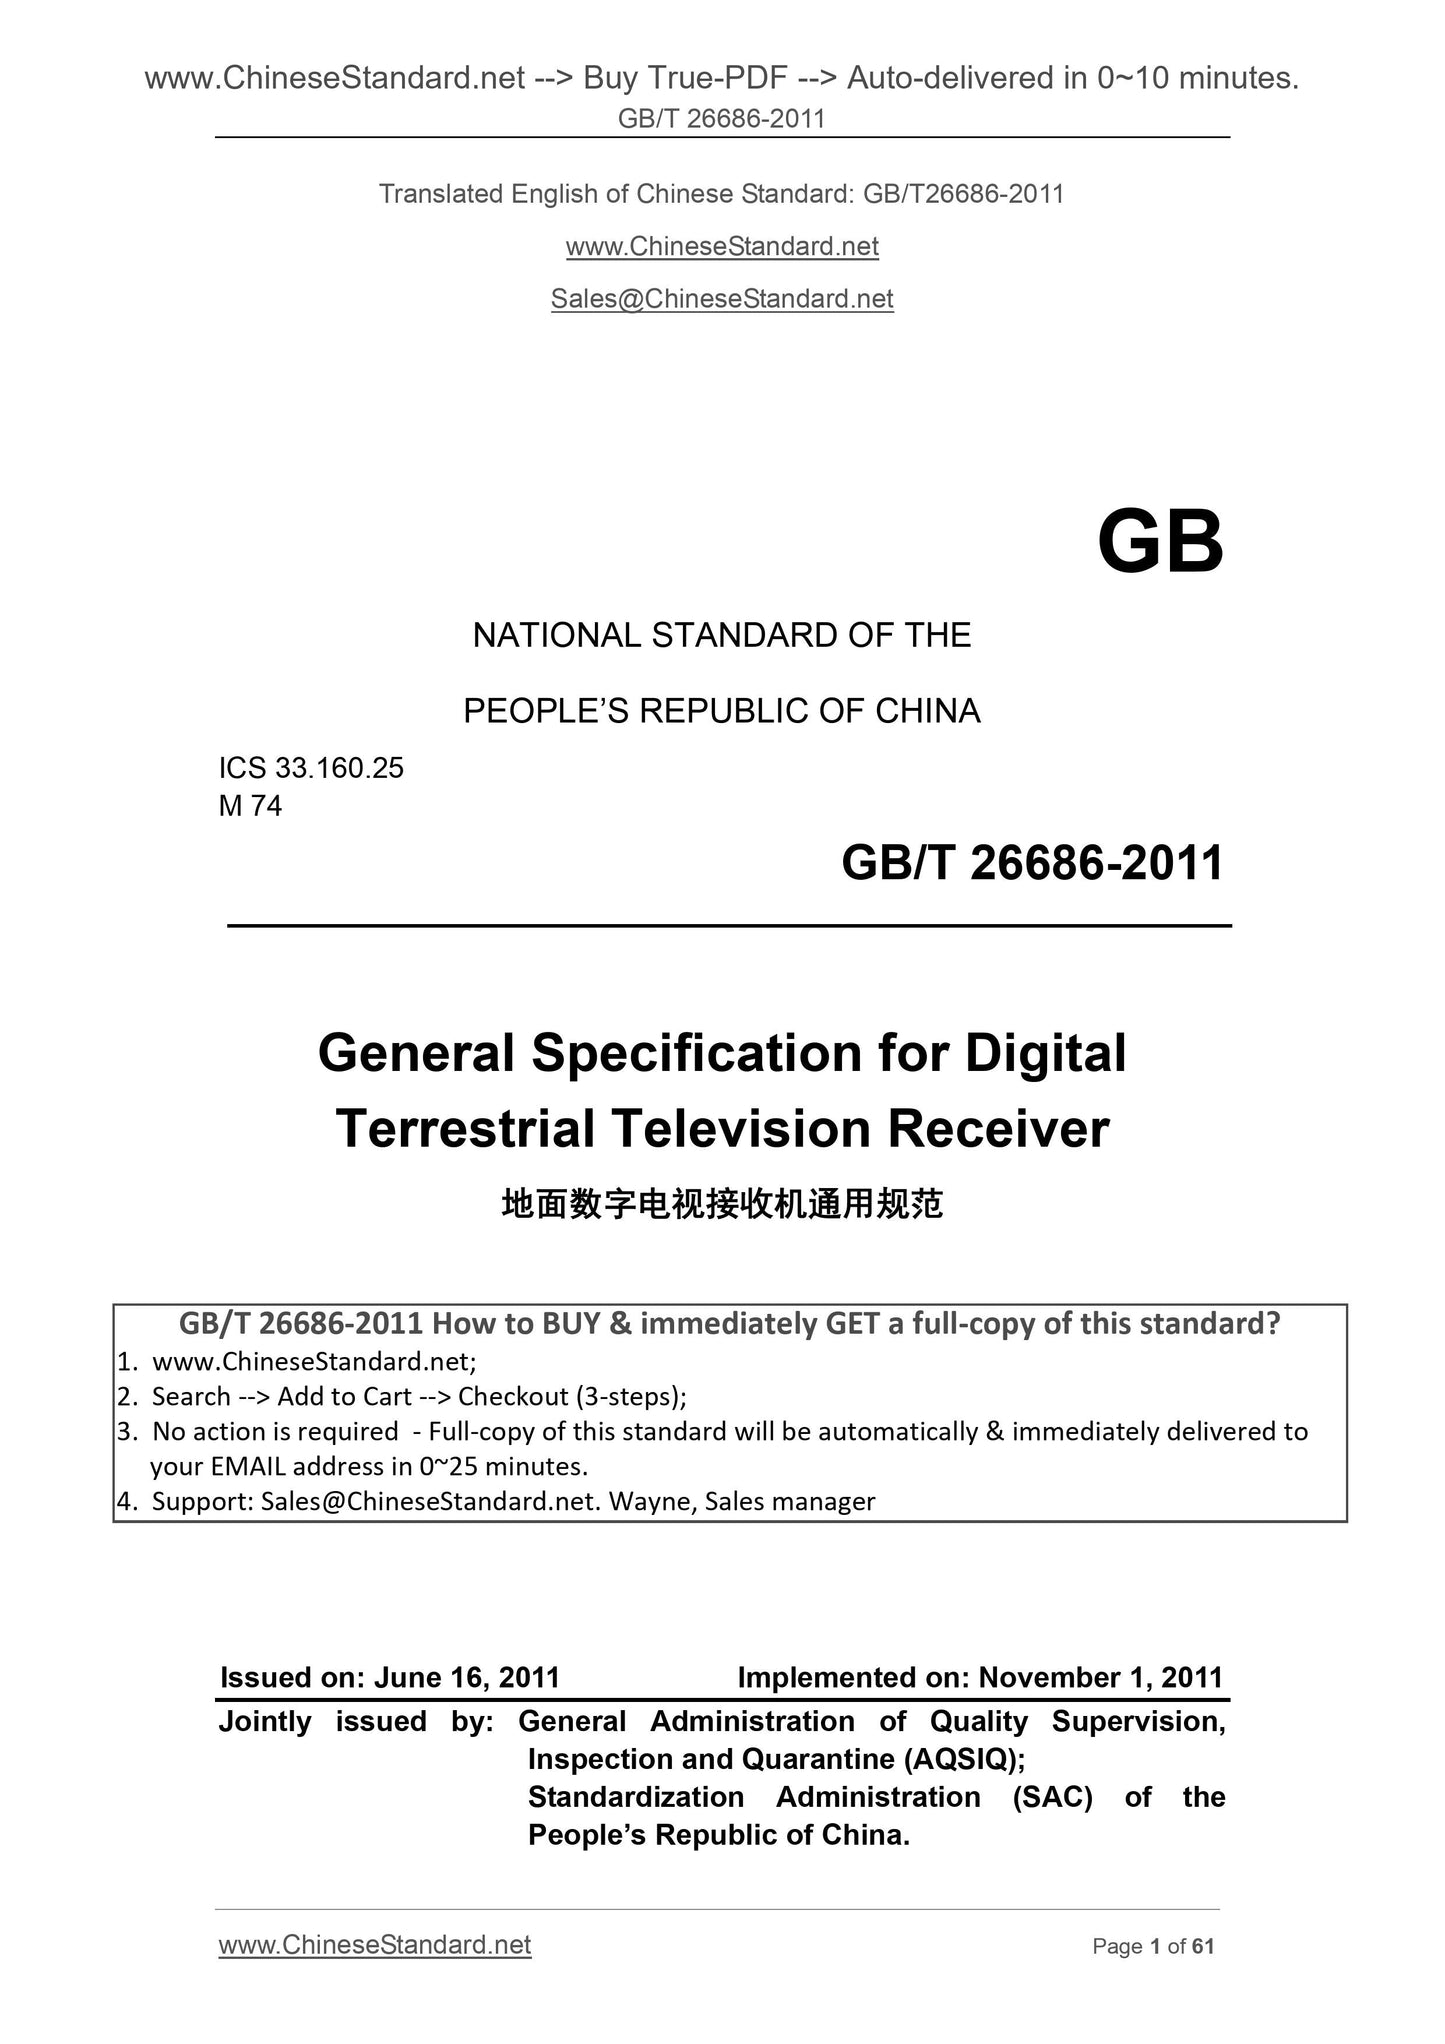 GB/T 26686-2011 Page 1